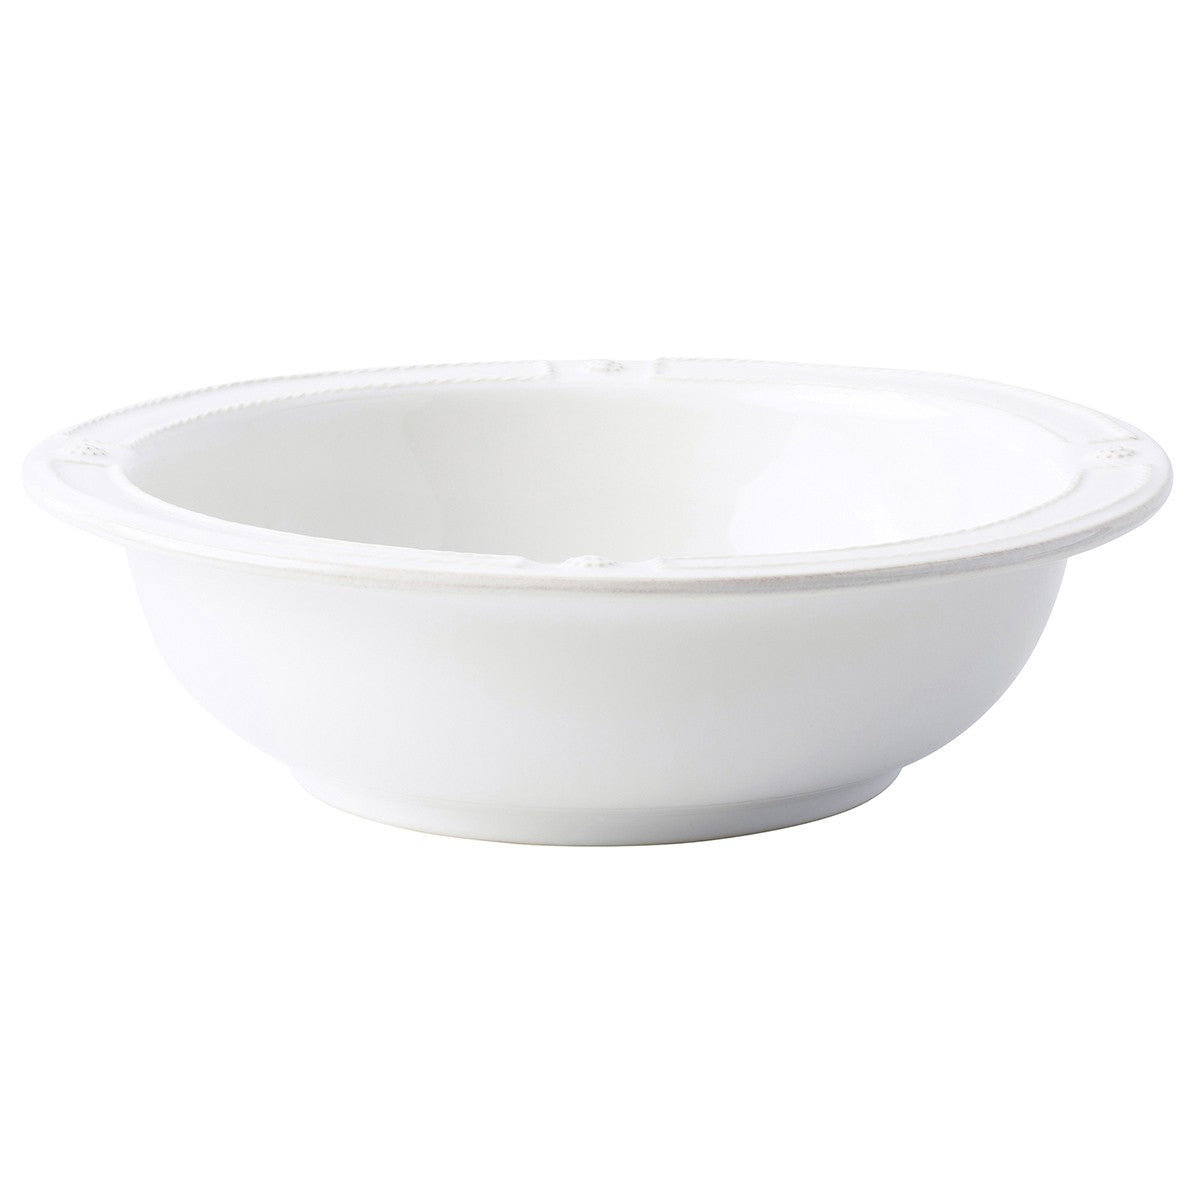 whitewashed berry and thread serving bowl on a white background